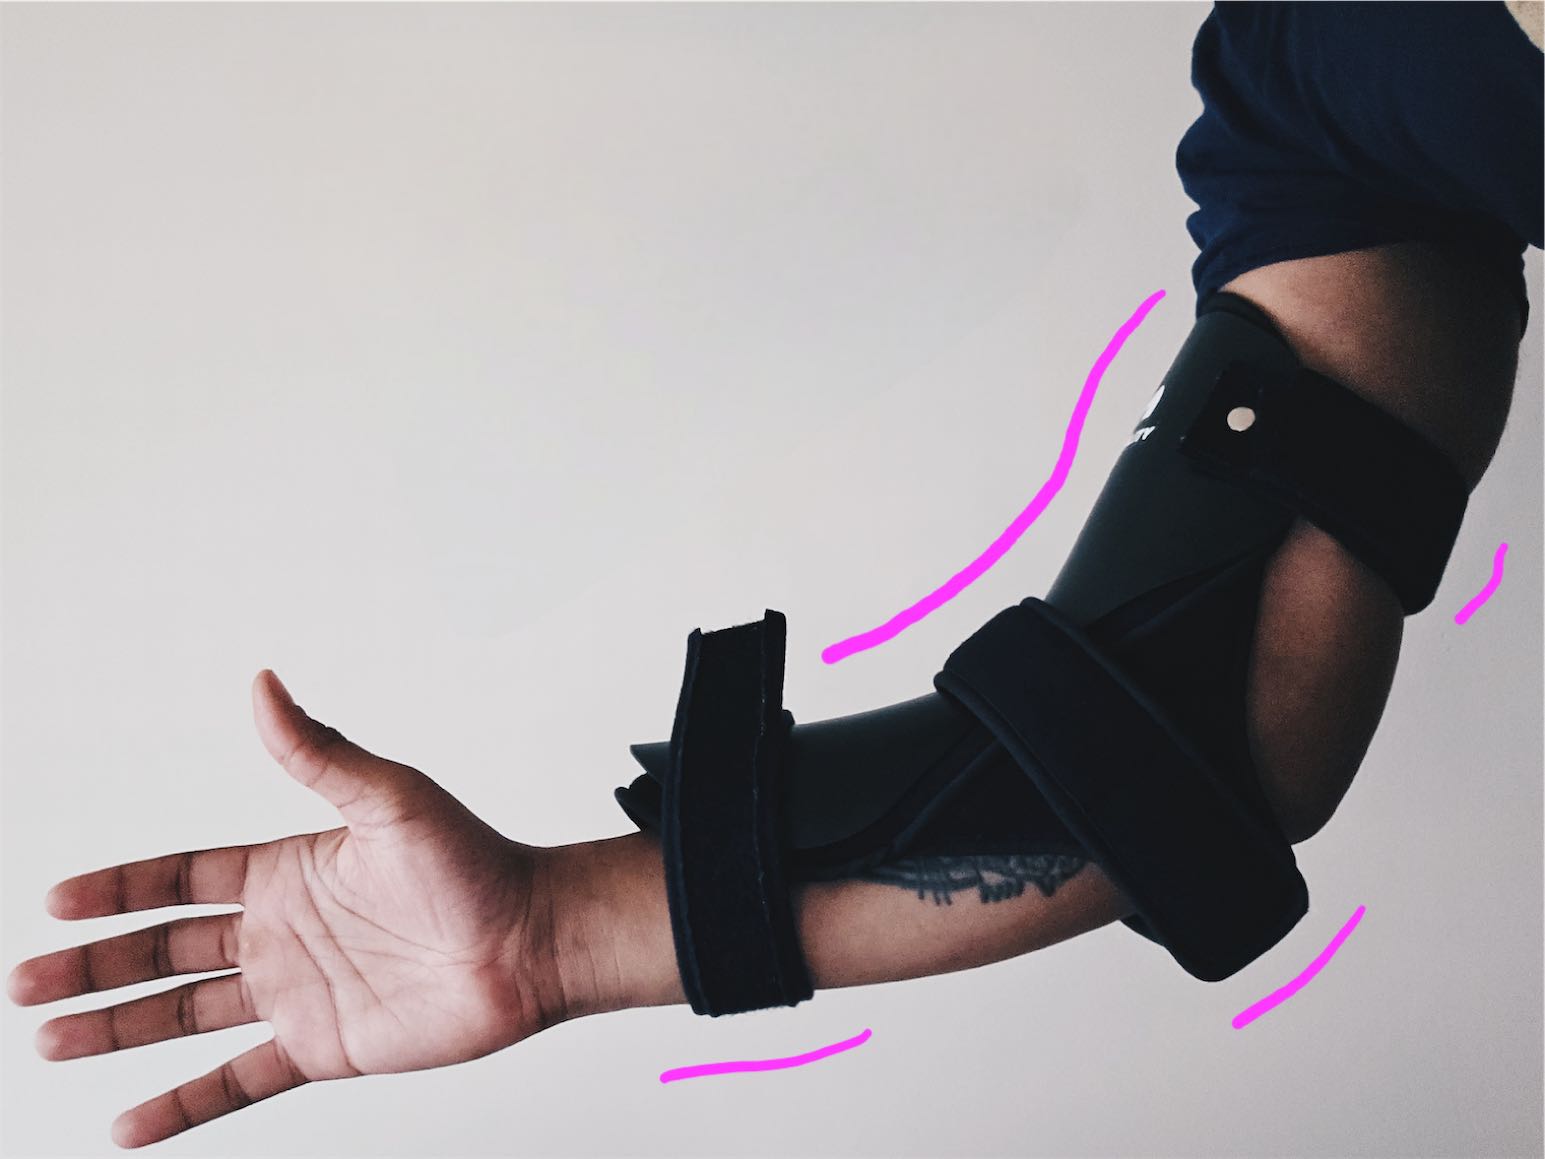 Photo of my right arm while wearing an arm brace. Annotated accents around the brace in pink